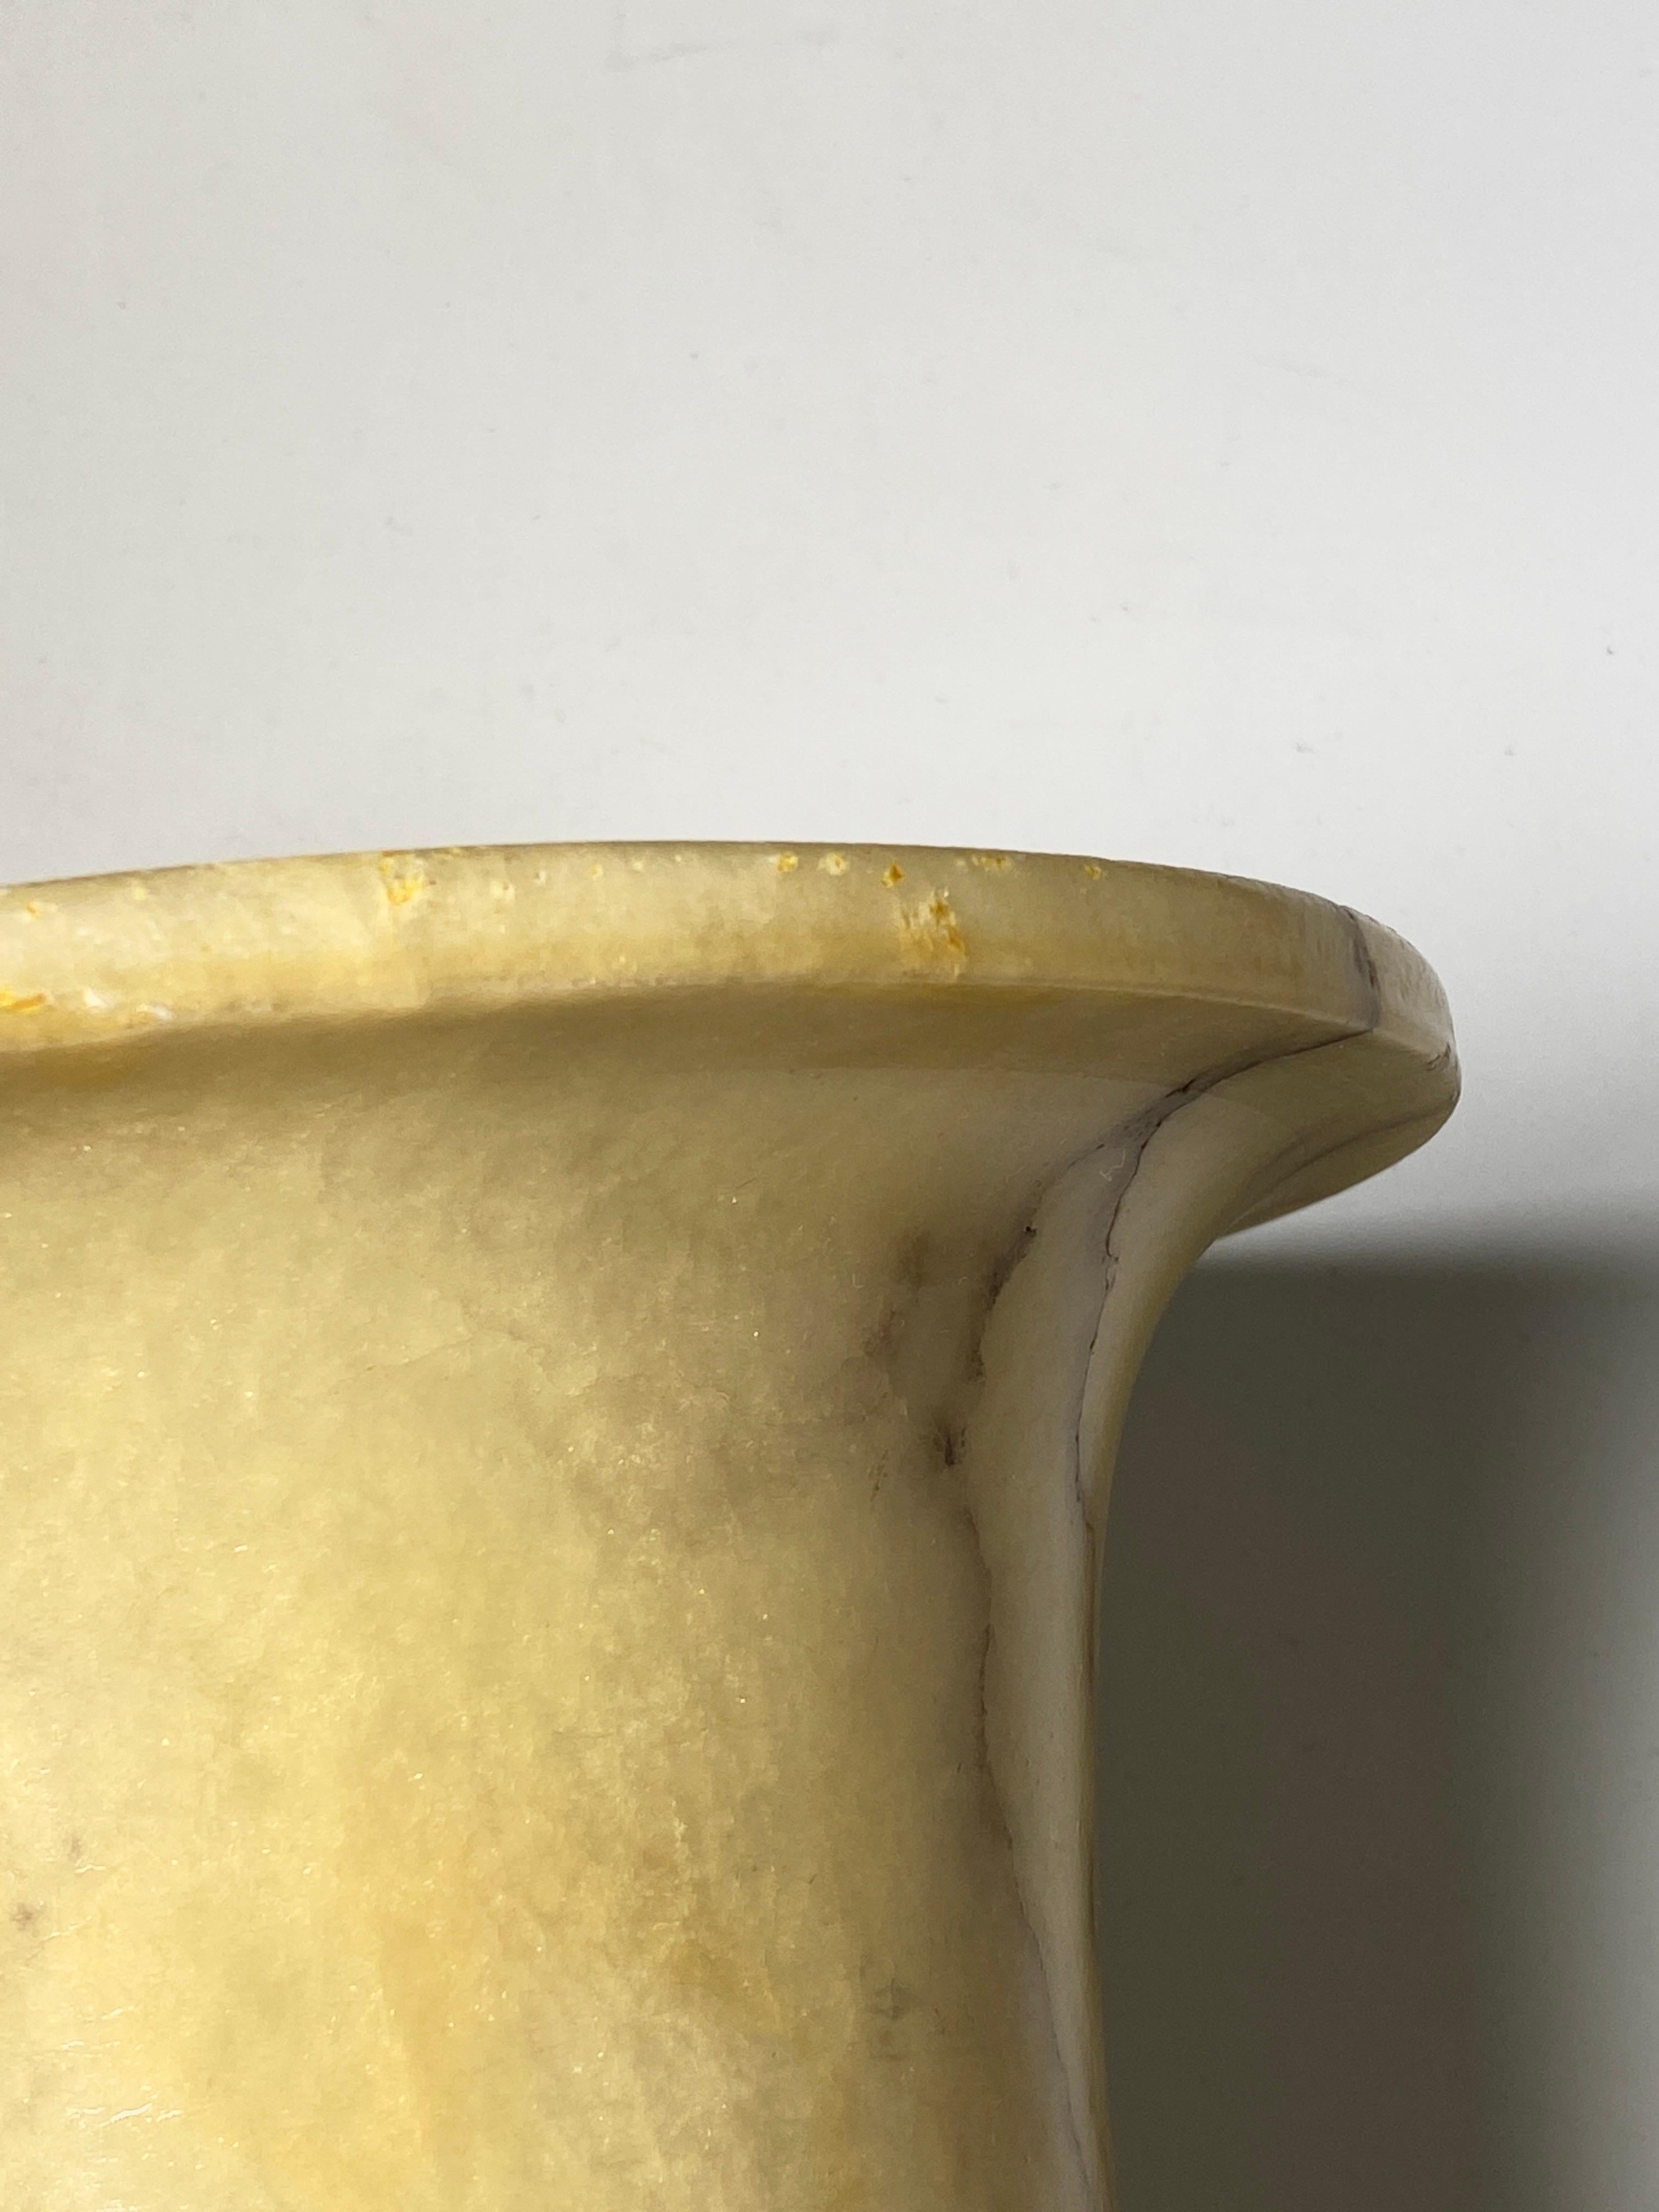 Art Deco Alabaster Urn Uplighter Lamp, White and Yelow Color, France, circa 1940 In Good Condition For Sale In Auribeau sur Siagne, FR